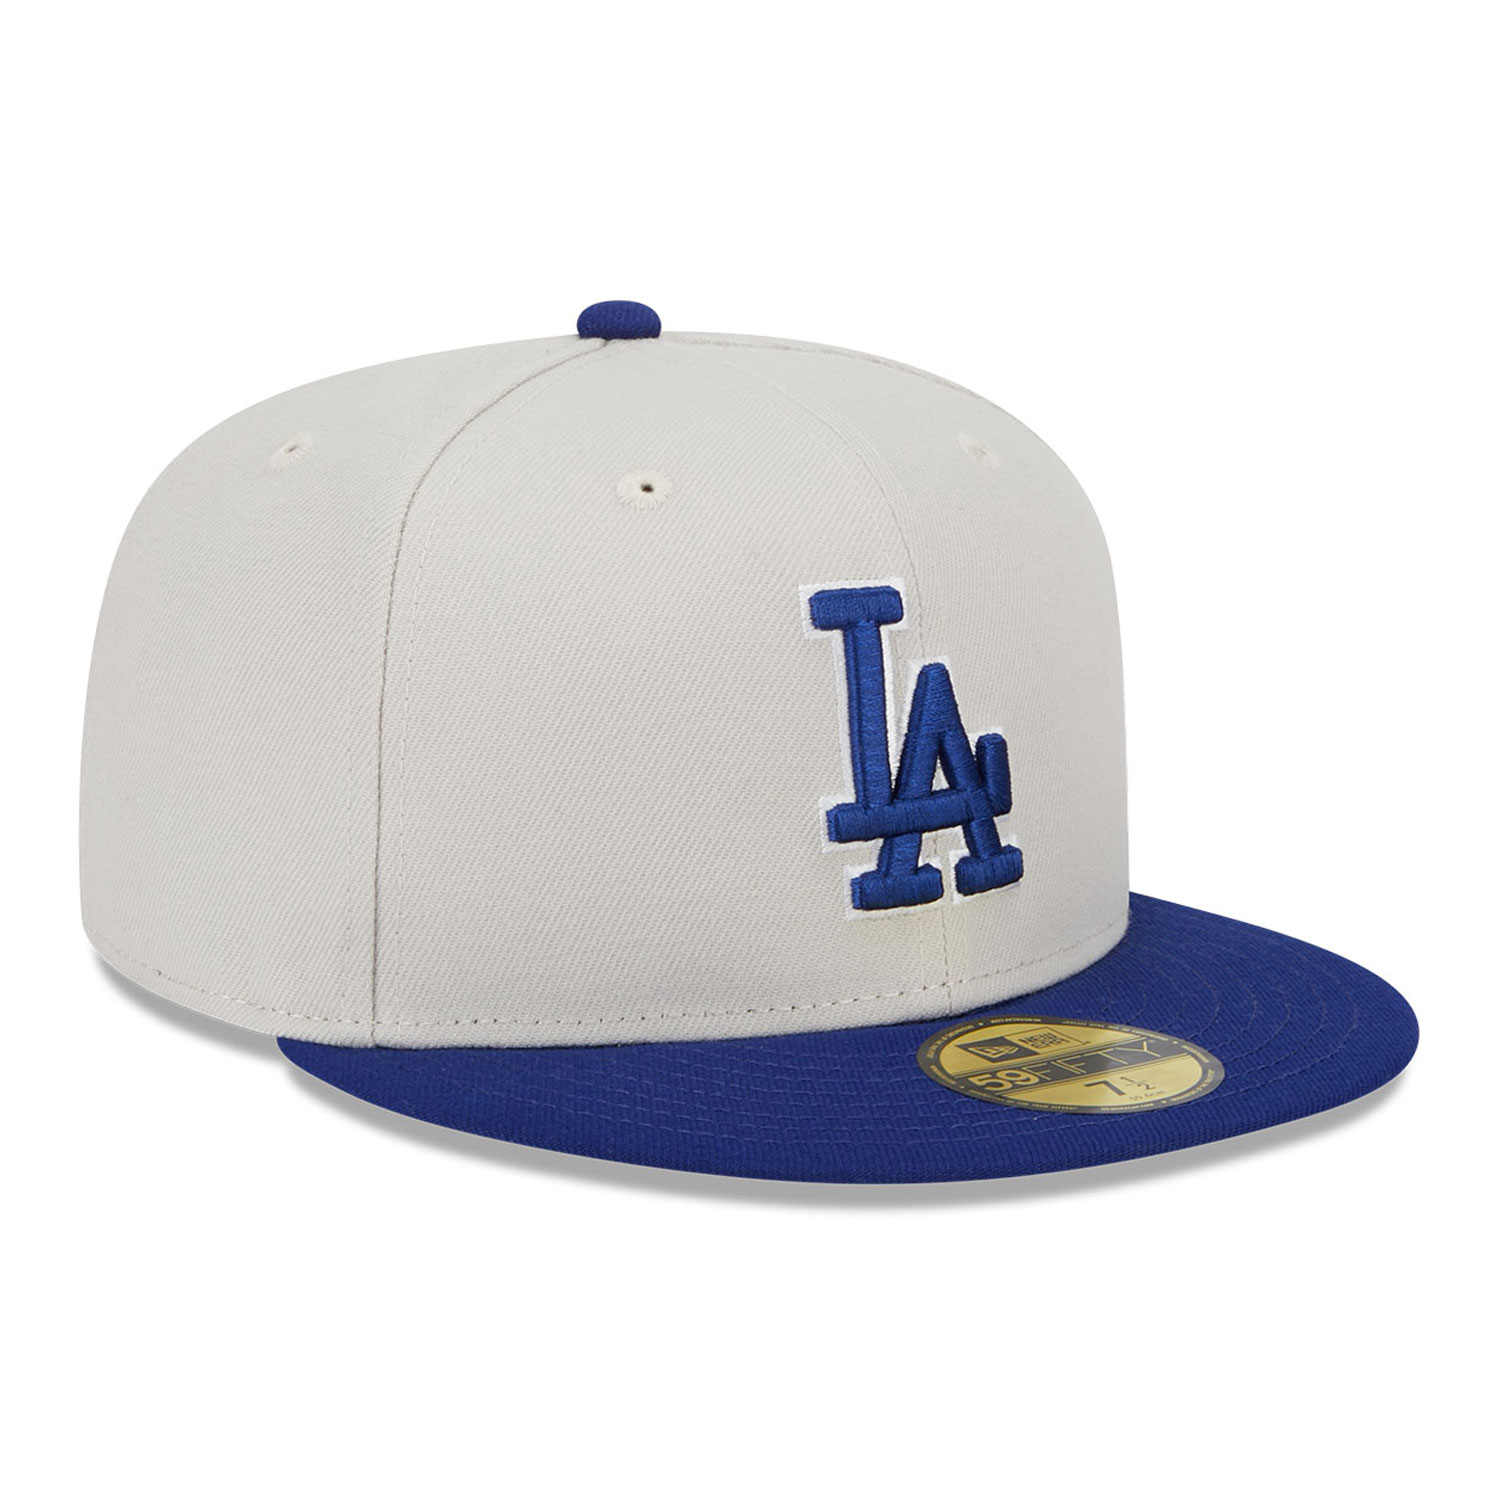 LA Dodgers Varsity Letter Stone 59FIFTY Fitted Cap